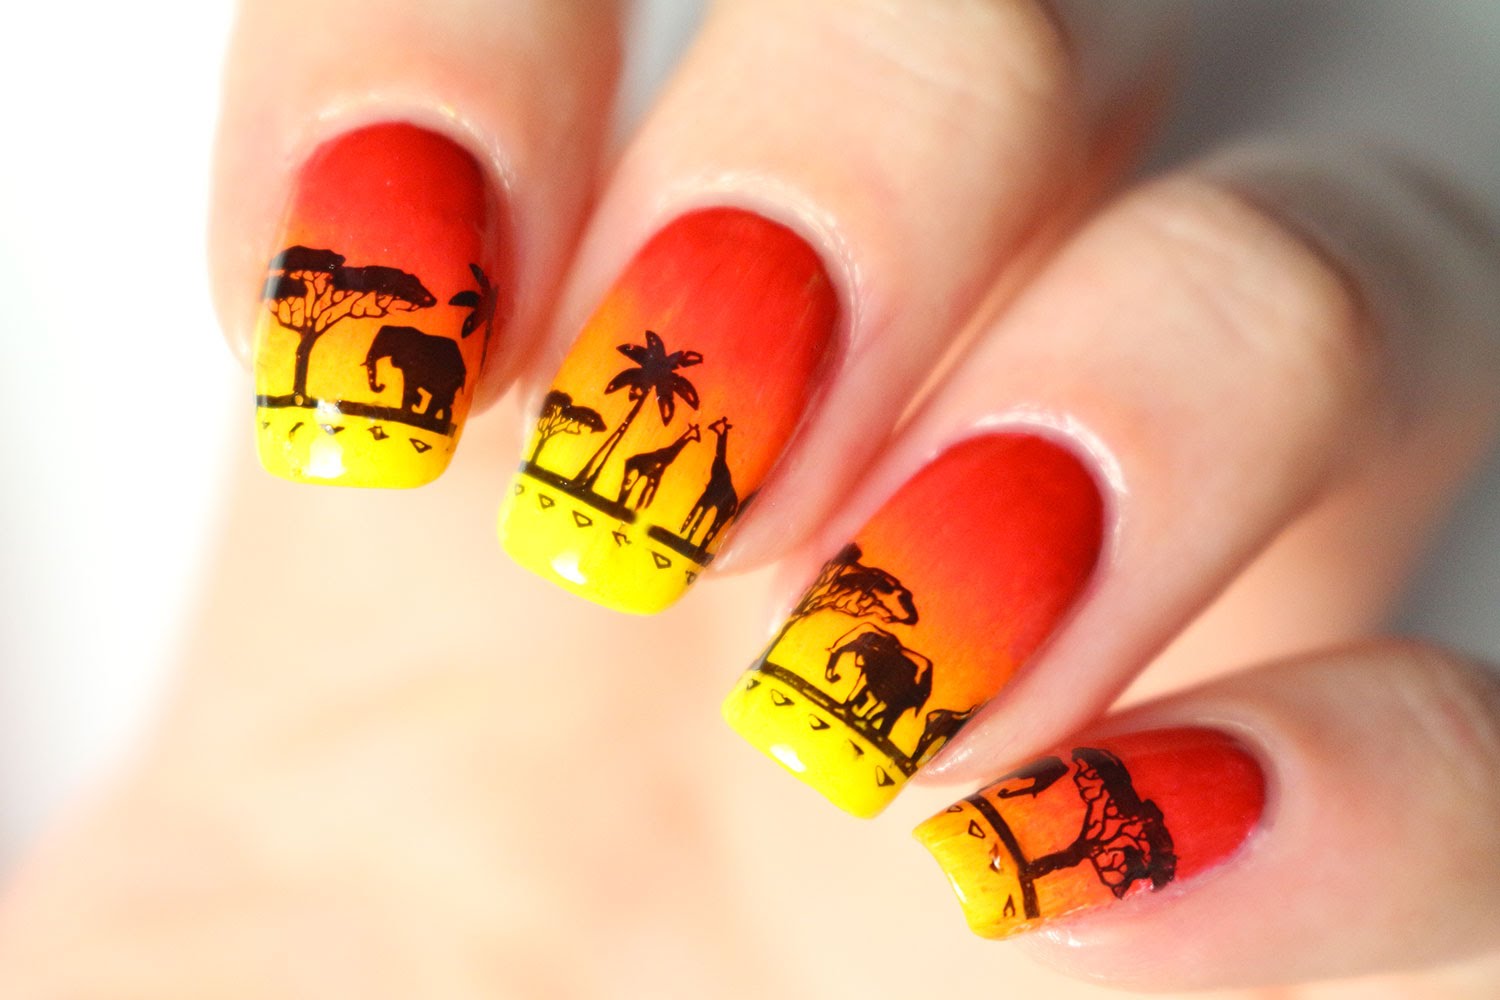 6. "Edgy and Creative Nail Art from Tumblr Bloggers" - wide 7